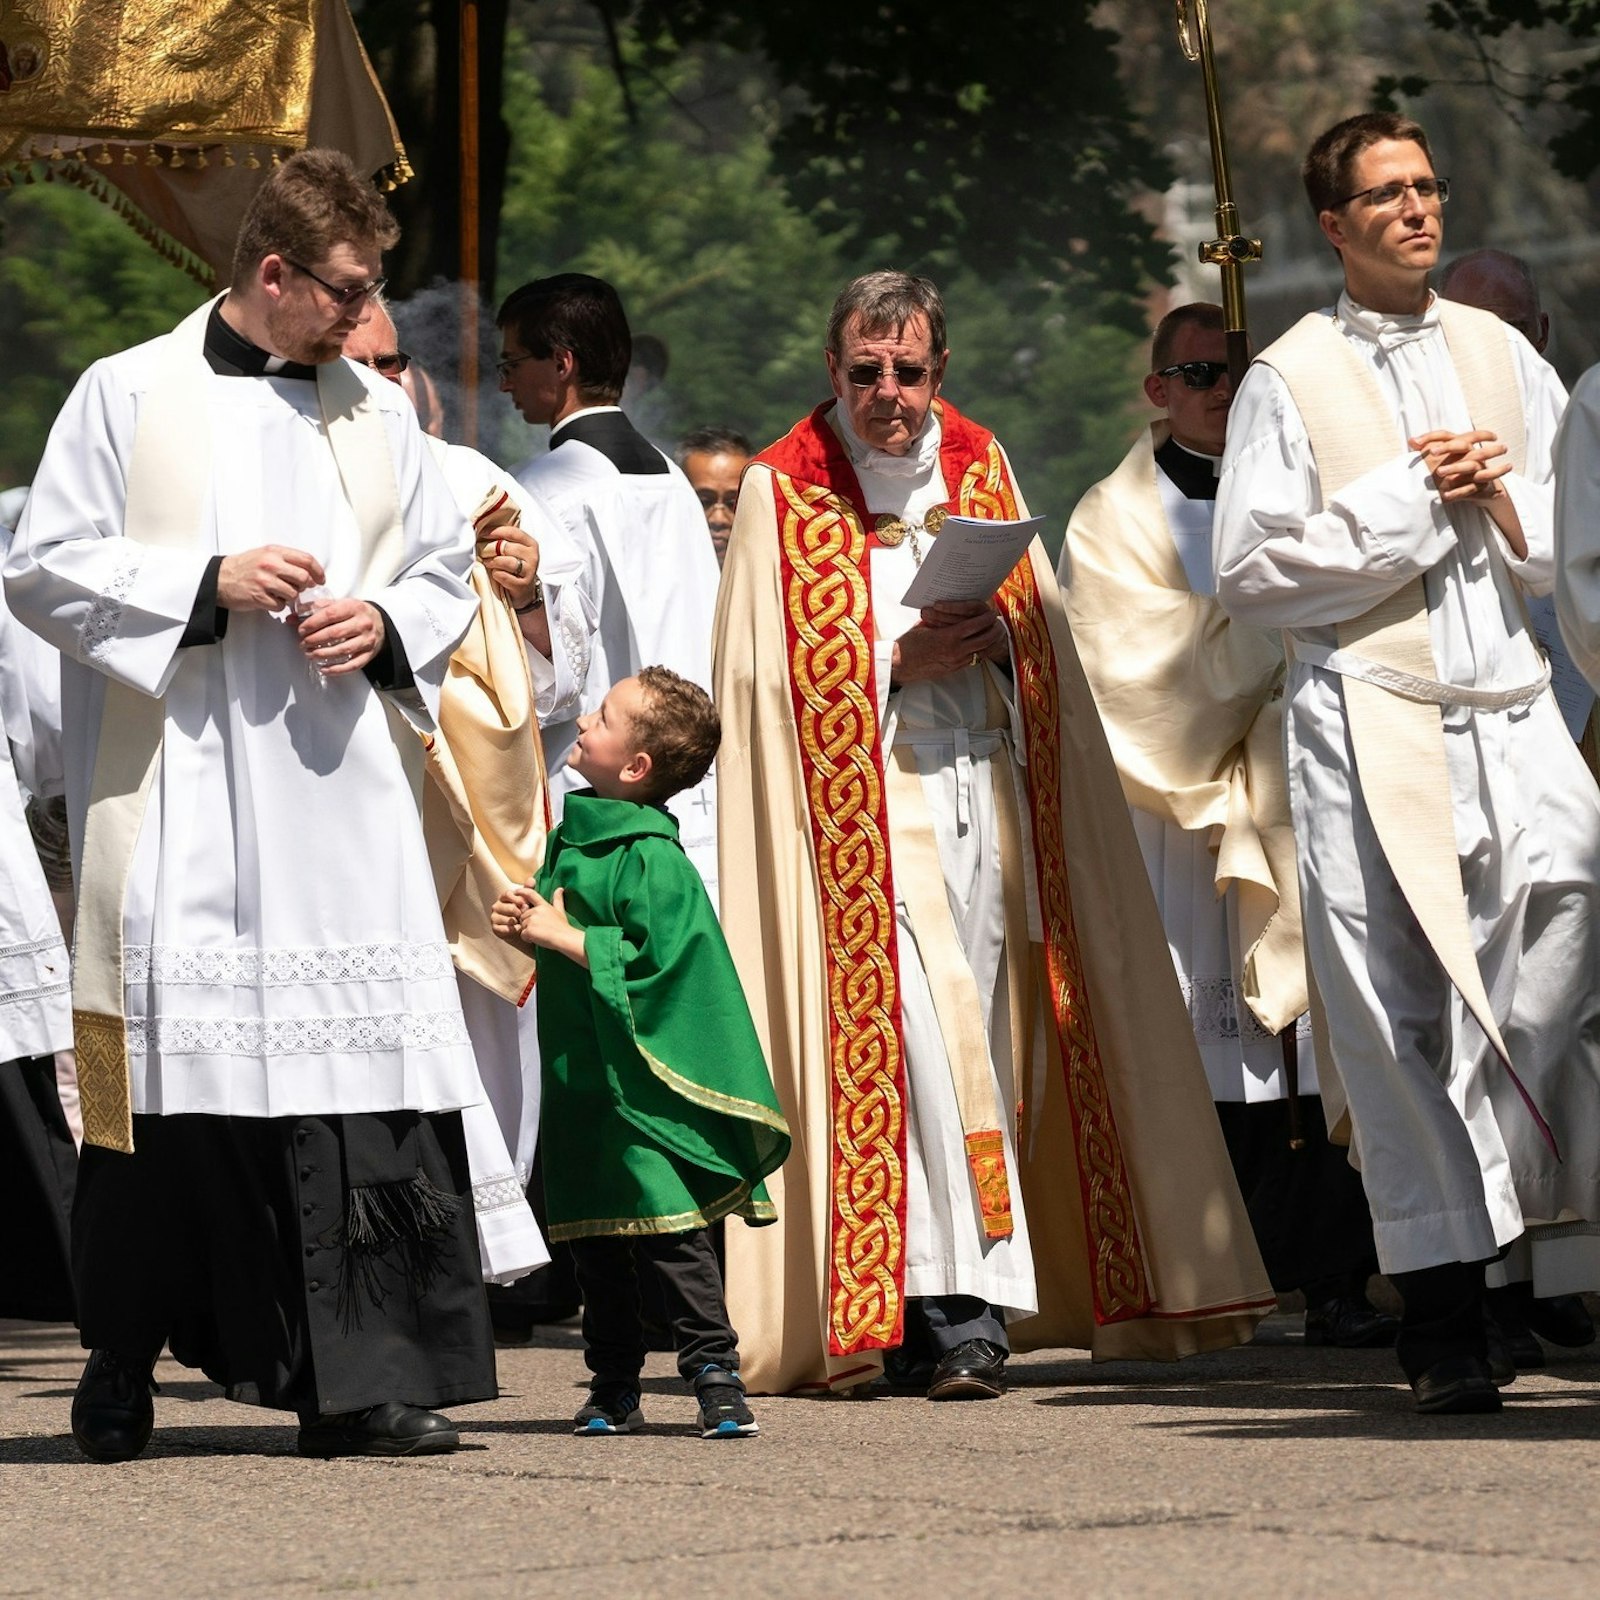 Five-year-old Lucas Mattos gets the attention of Fr. David Tomaszycki, left, as he marches at the front of the Eucharistic procession alongside Archbishop Allen H. Vigneron. Mattos wore his own priestly "vestments," a gift from his grandparents. Lucas' mother said the boy has shown an interest in the Eucharist from a young age. (Melanie Reyes | Special to Detroit Catholic)